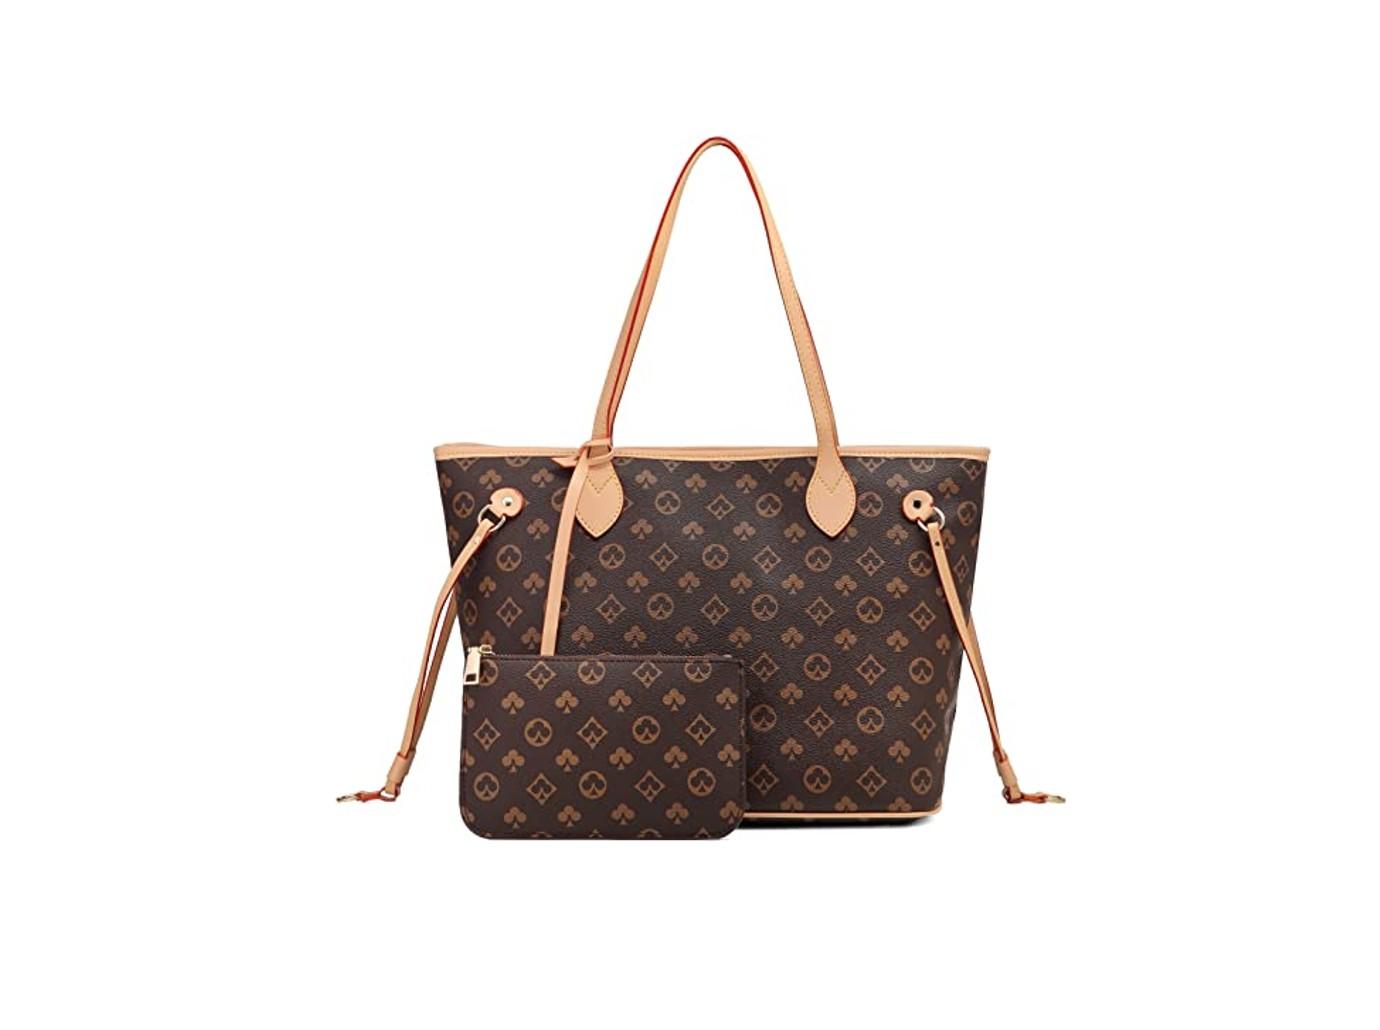 gammelklog Såkaldte Risikabel Boohoo Just Dropped The Perfect Louis Vuitton Duplicate